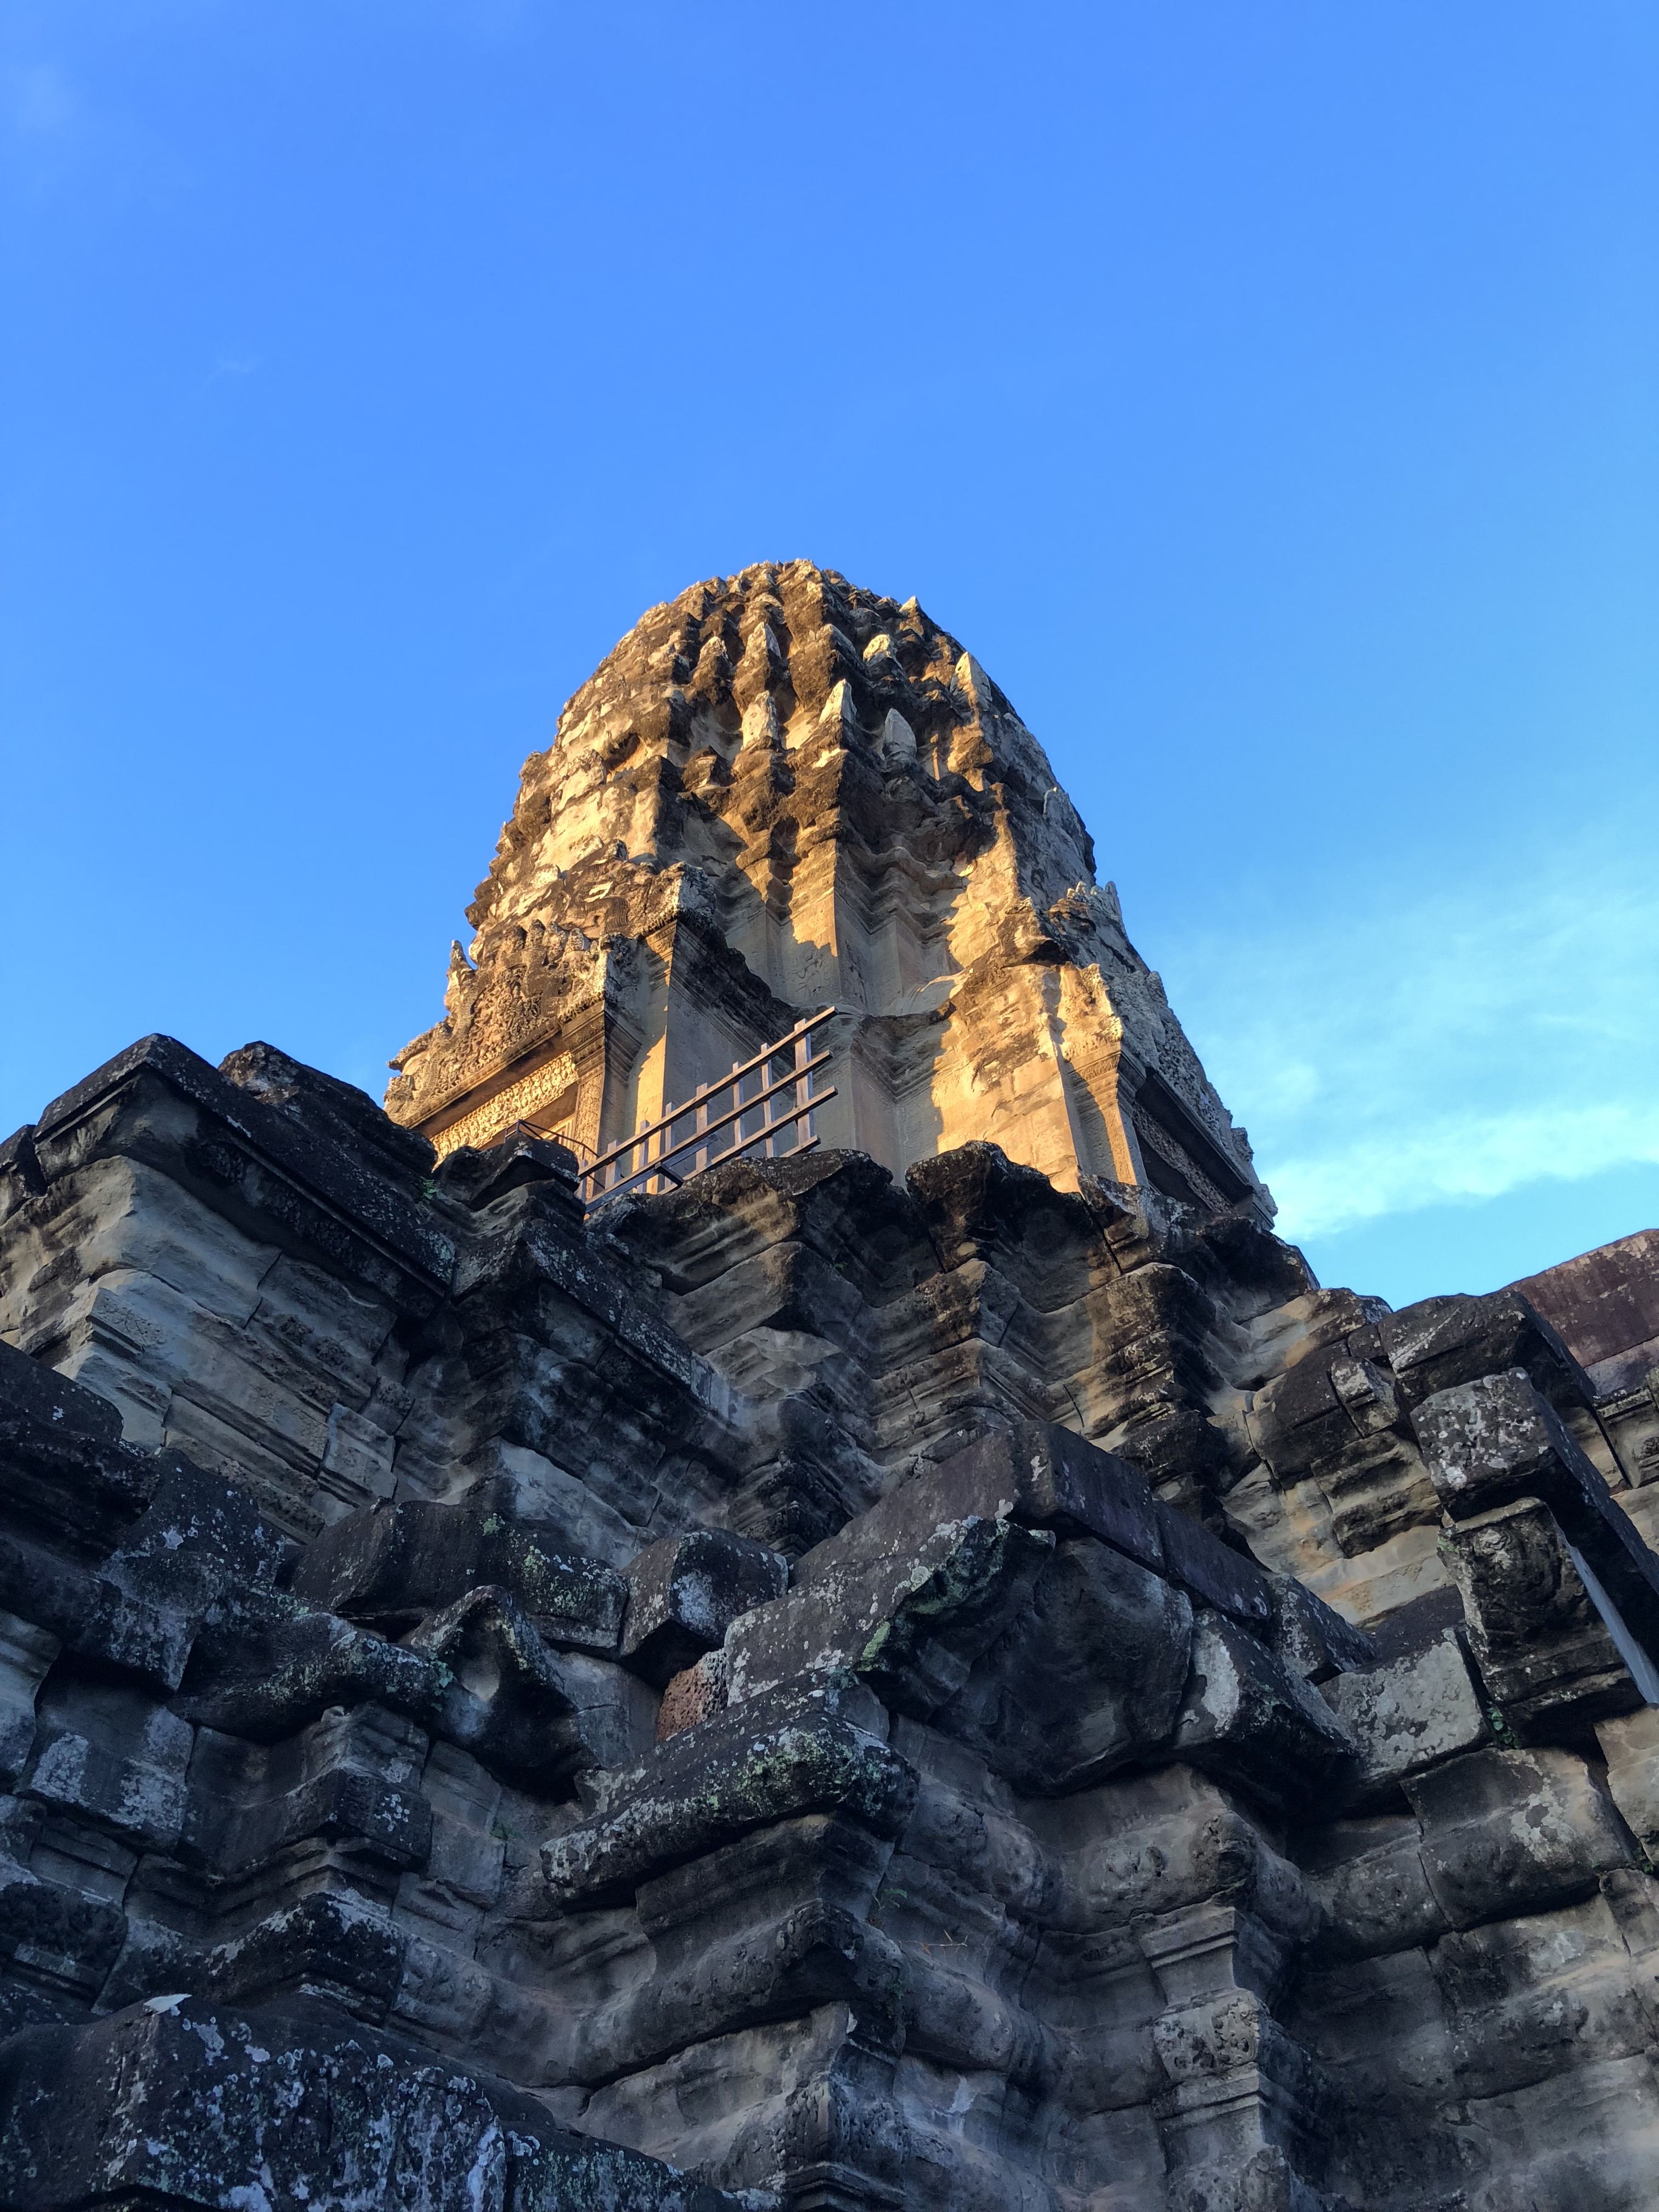 We are looking up at one of the towers of Angkor Wat. It is bathed in sunlight; below it the intricately carved walls are in shadow.